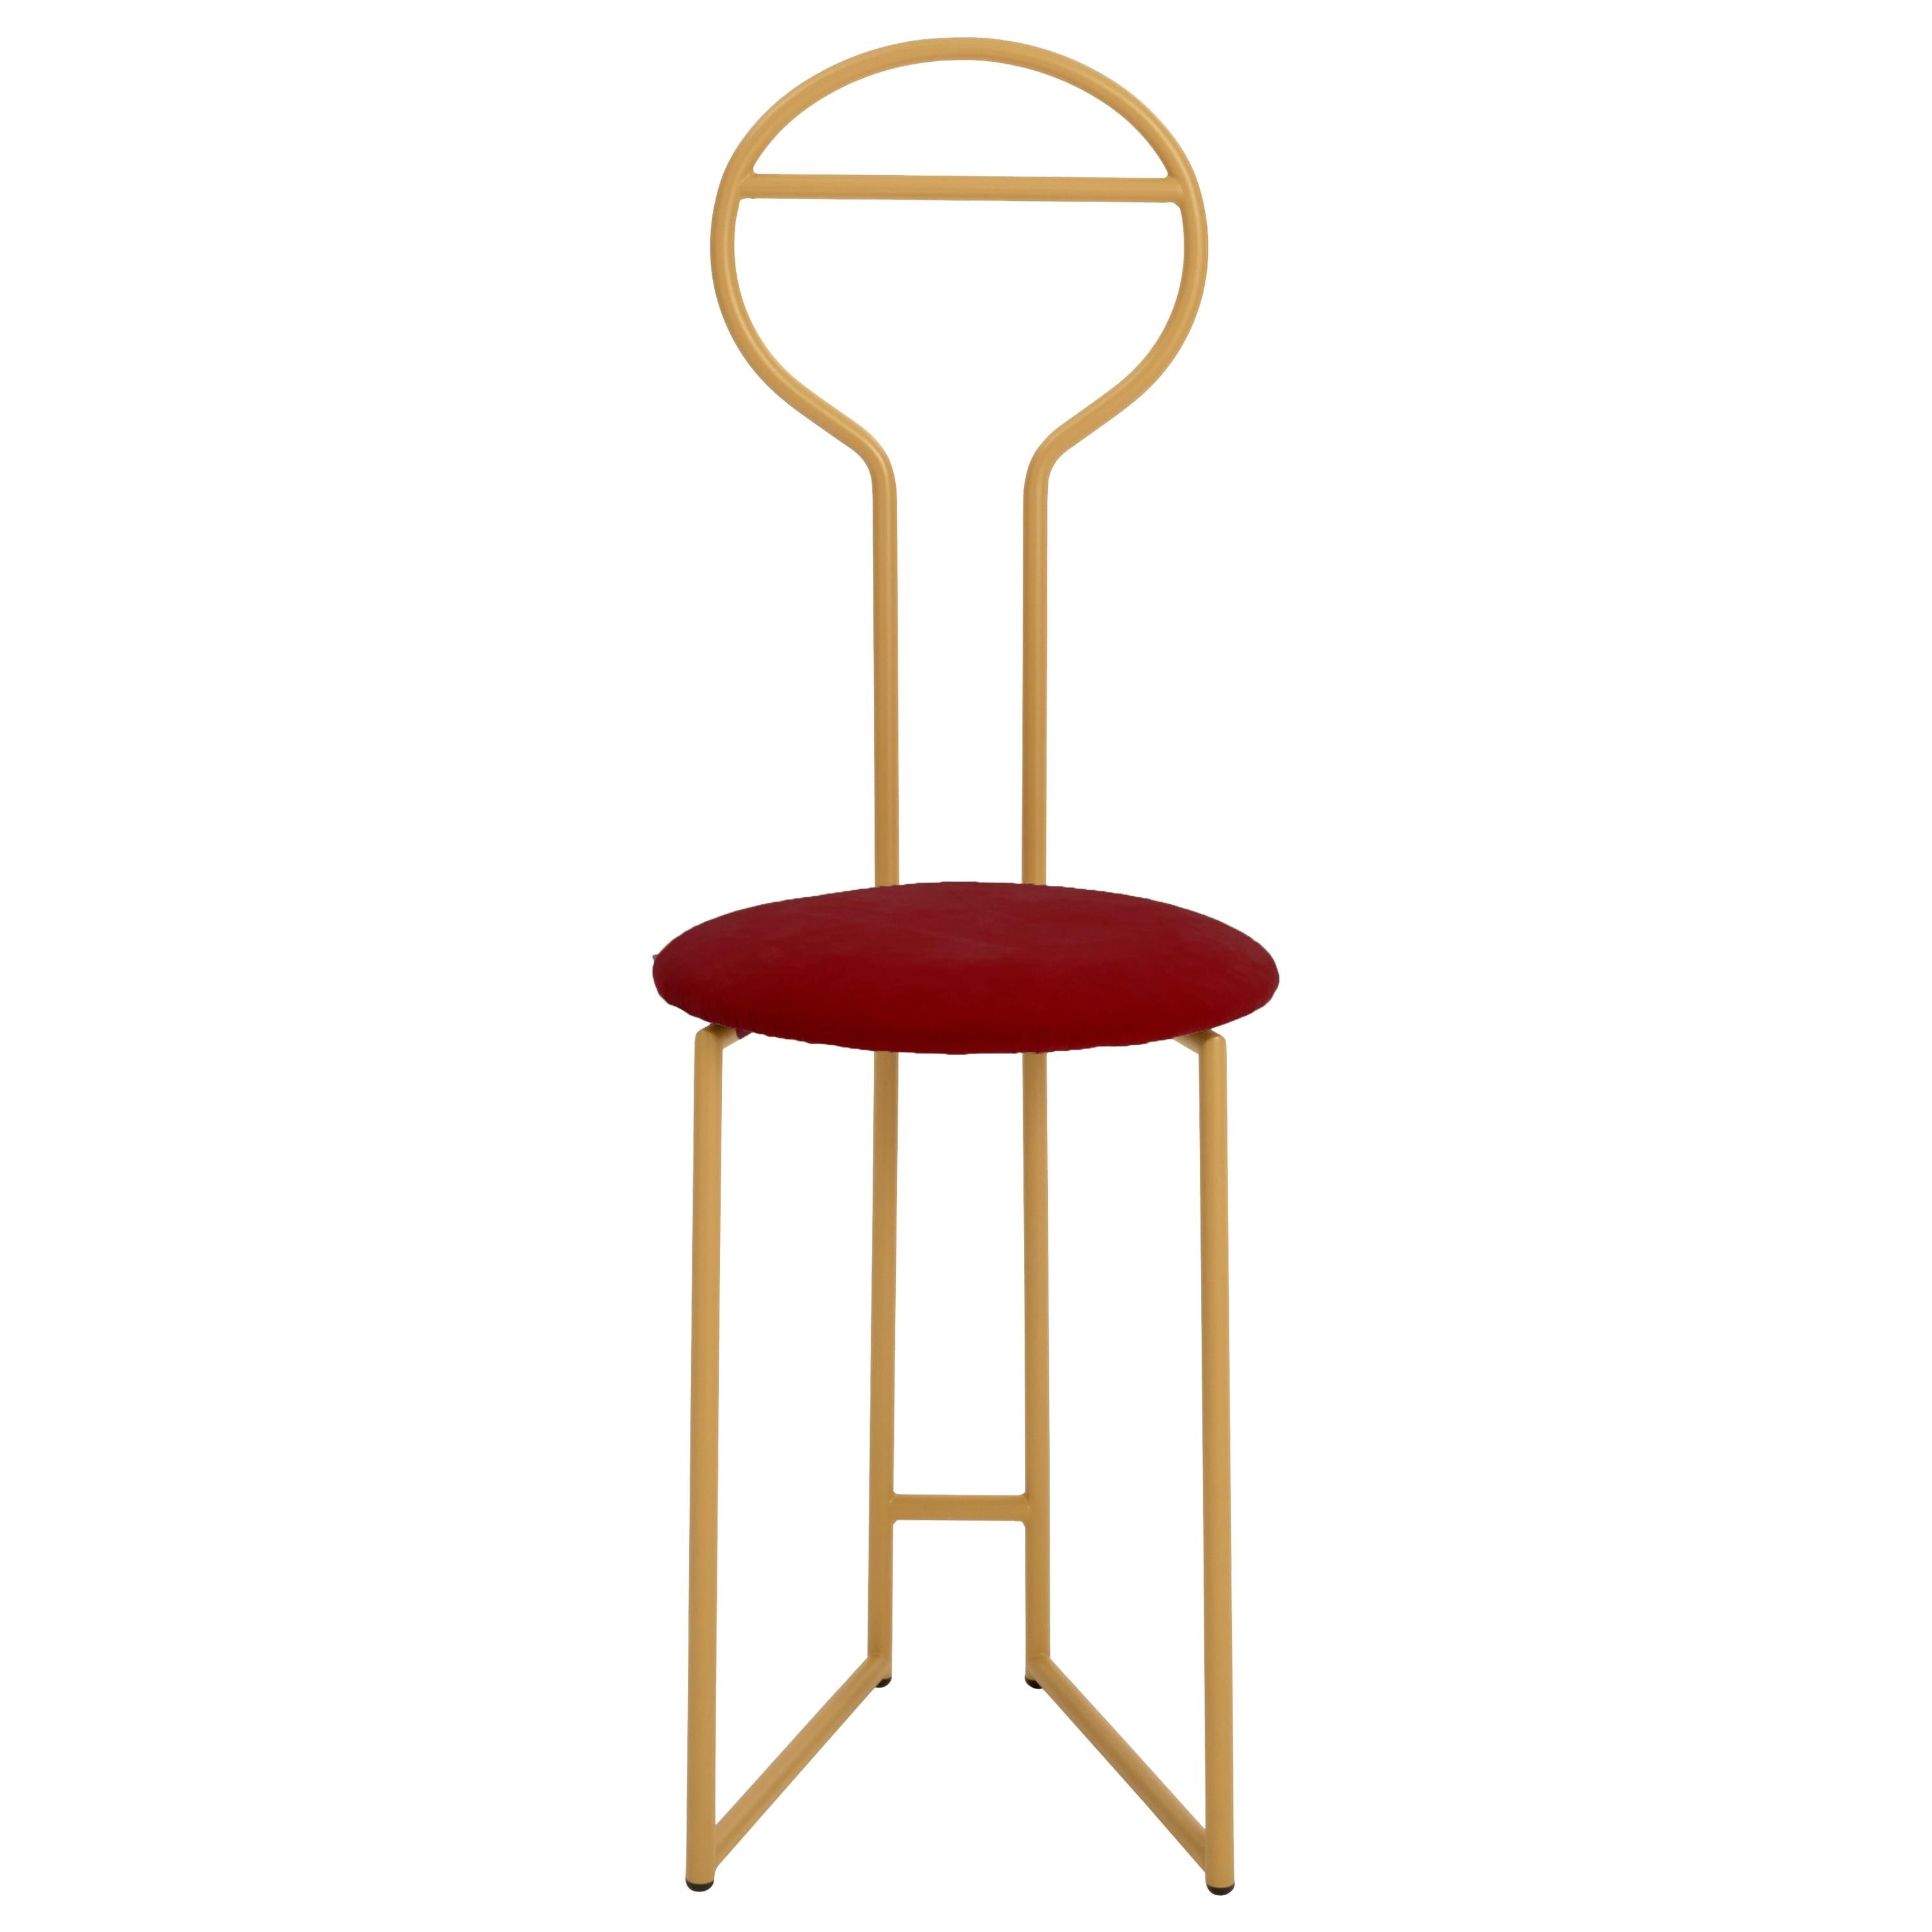 Joly Chairdrobe, High Back, Gold Structure and Red Fine Italian Velvet